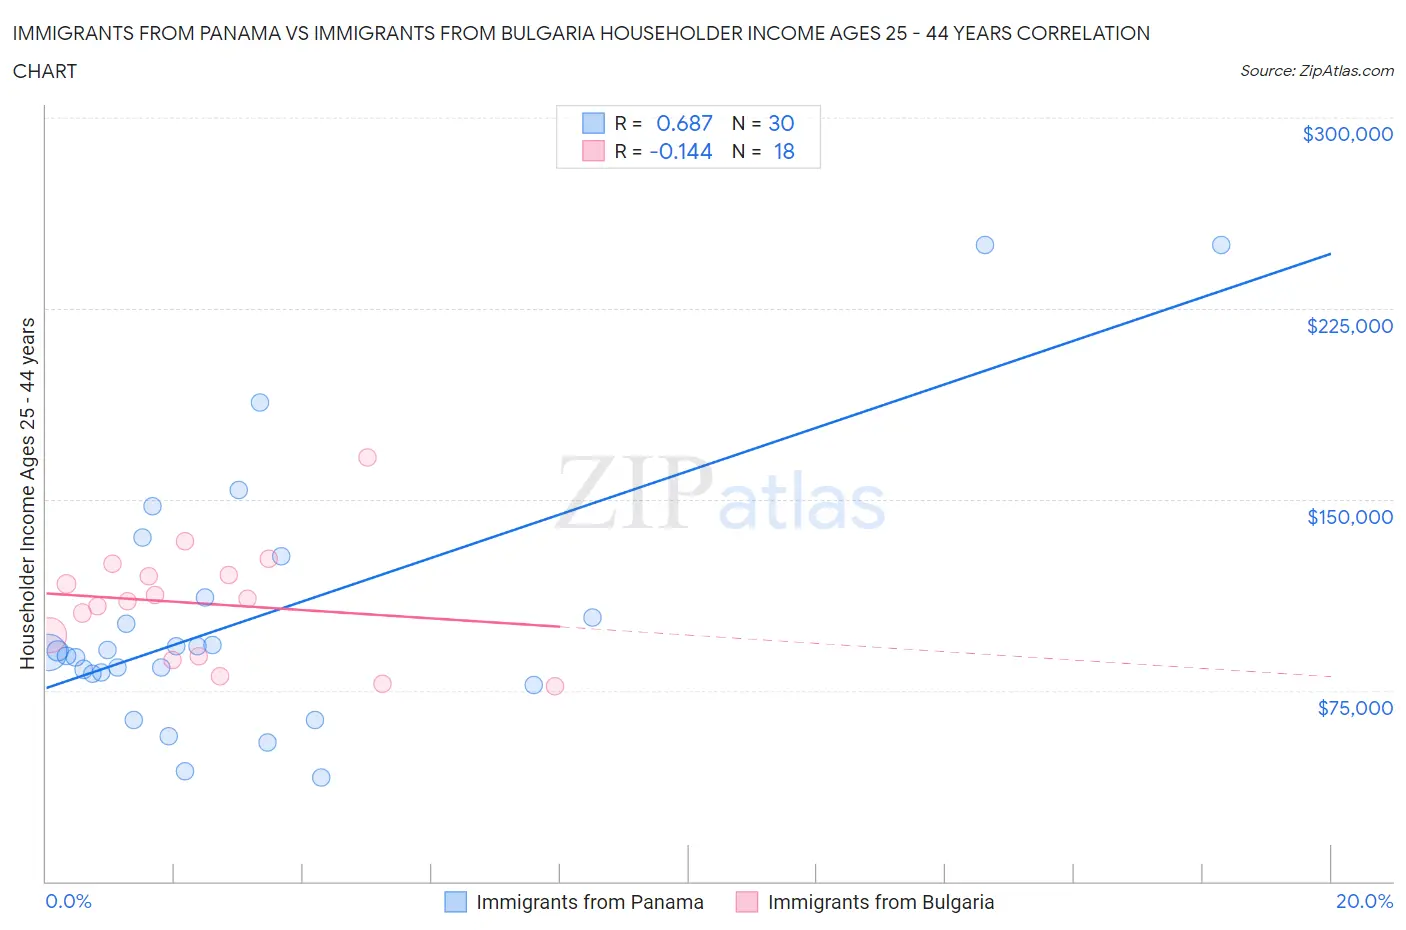 Immigrants from Panama vs Immigrants from Bulgaria Householder Income Ages 25 - 44 years